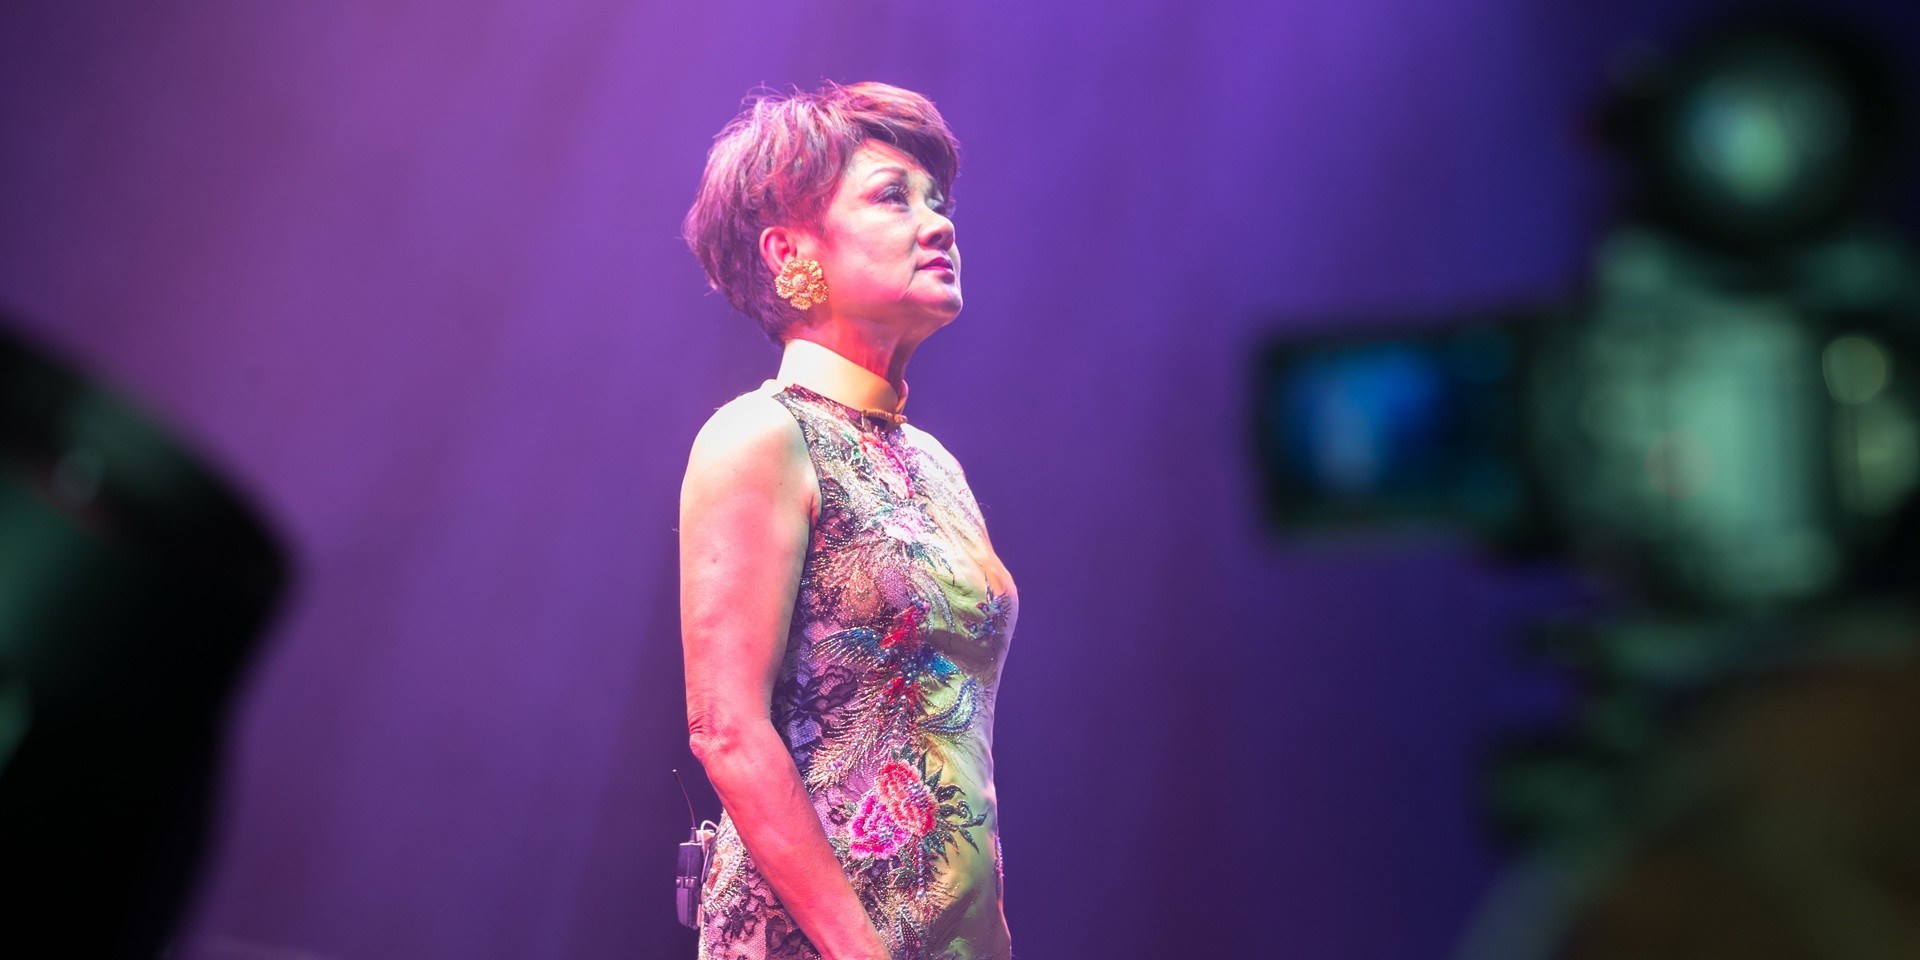 Life lessons learnt at Frances Yip's Fabulous at 70 concert – gig report